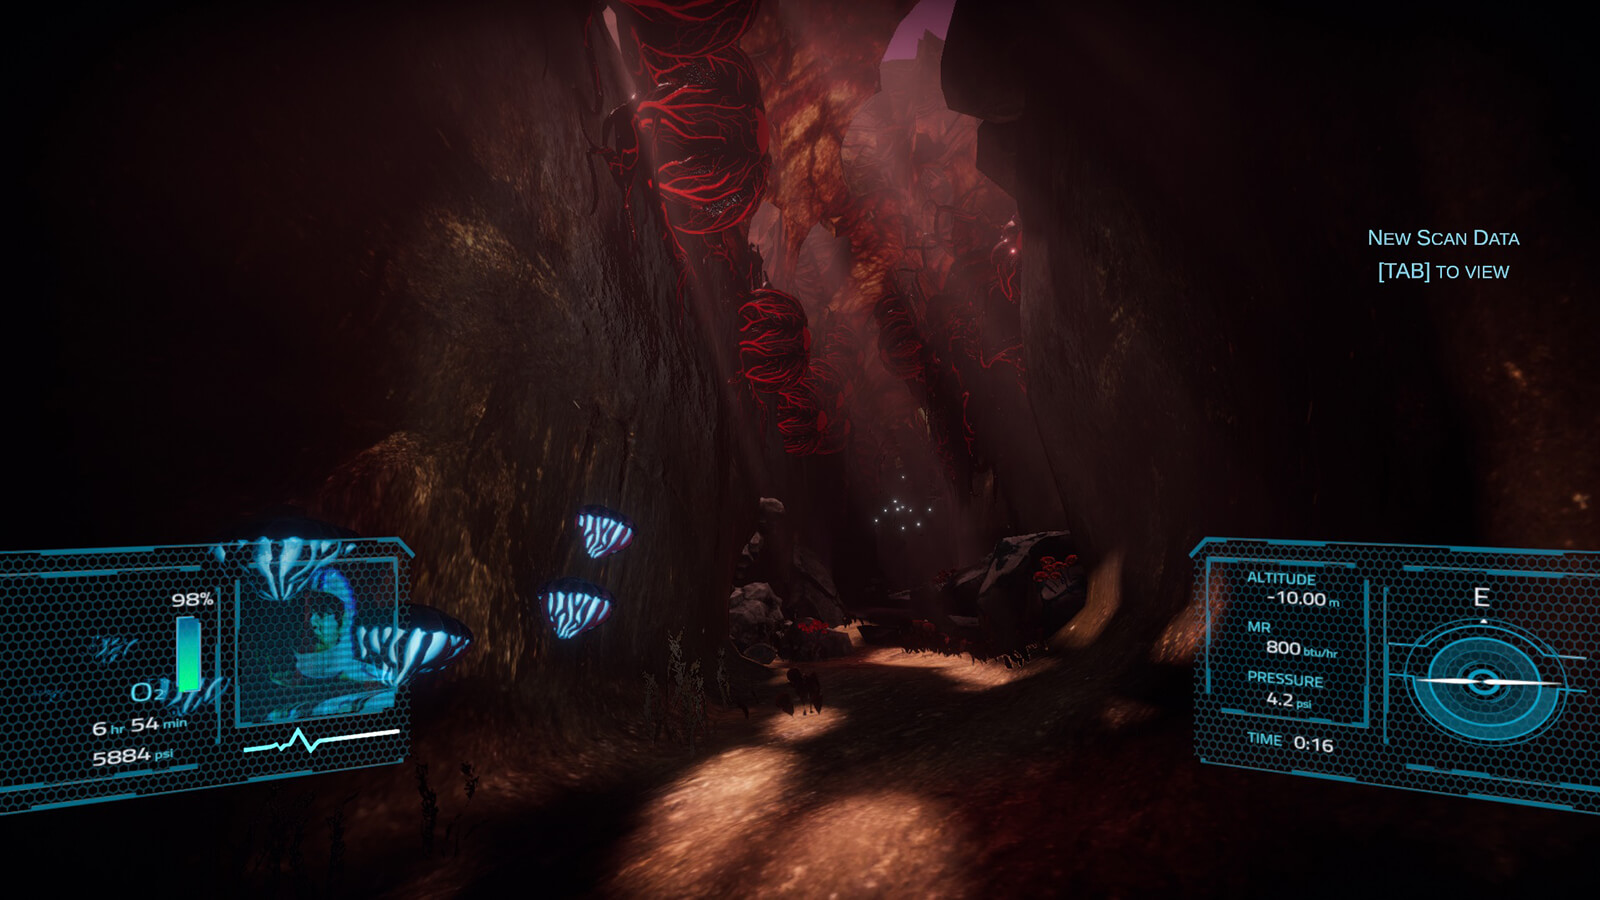 An alien cavern with glowing blue mushrooms, red growths, and the player's HUD layered on top.